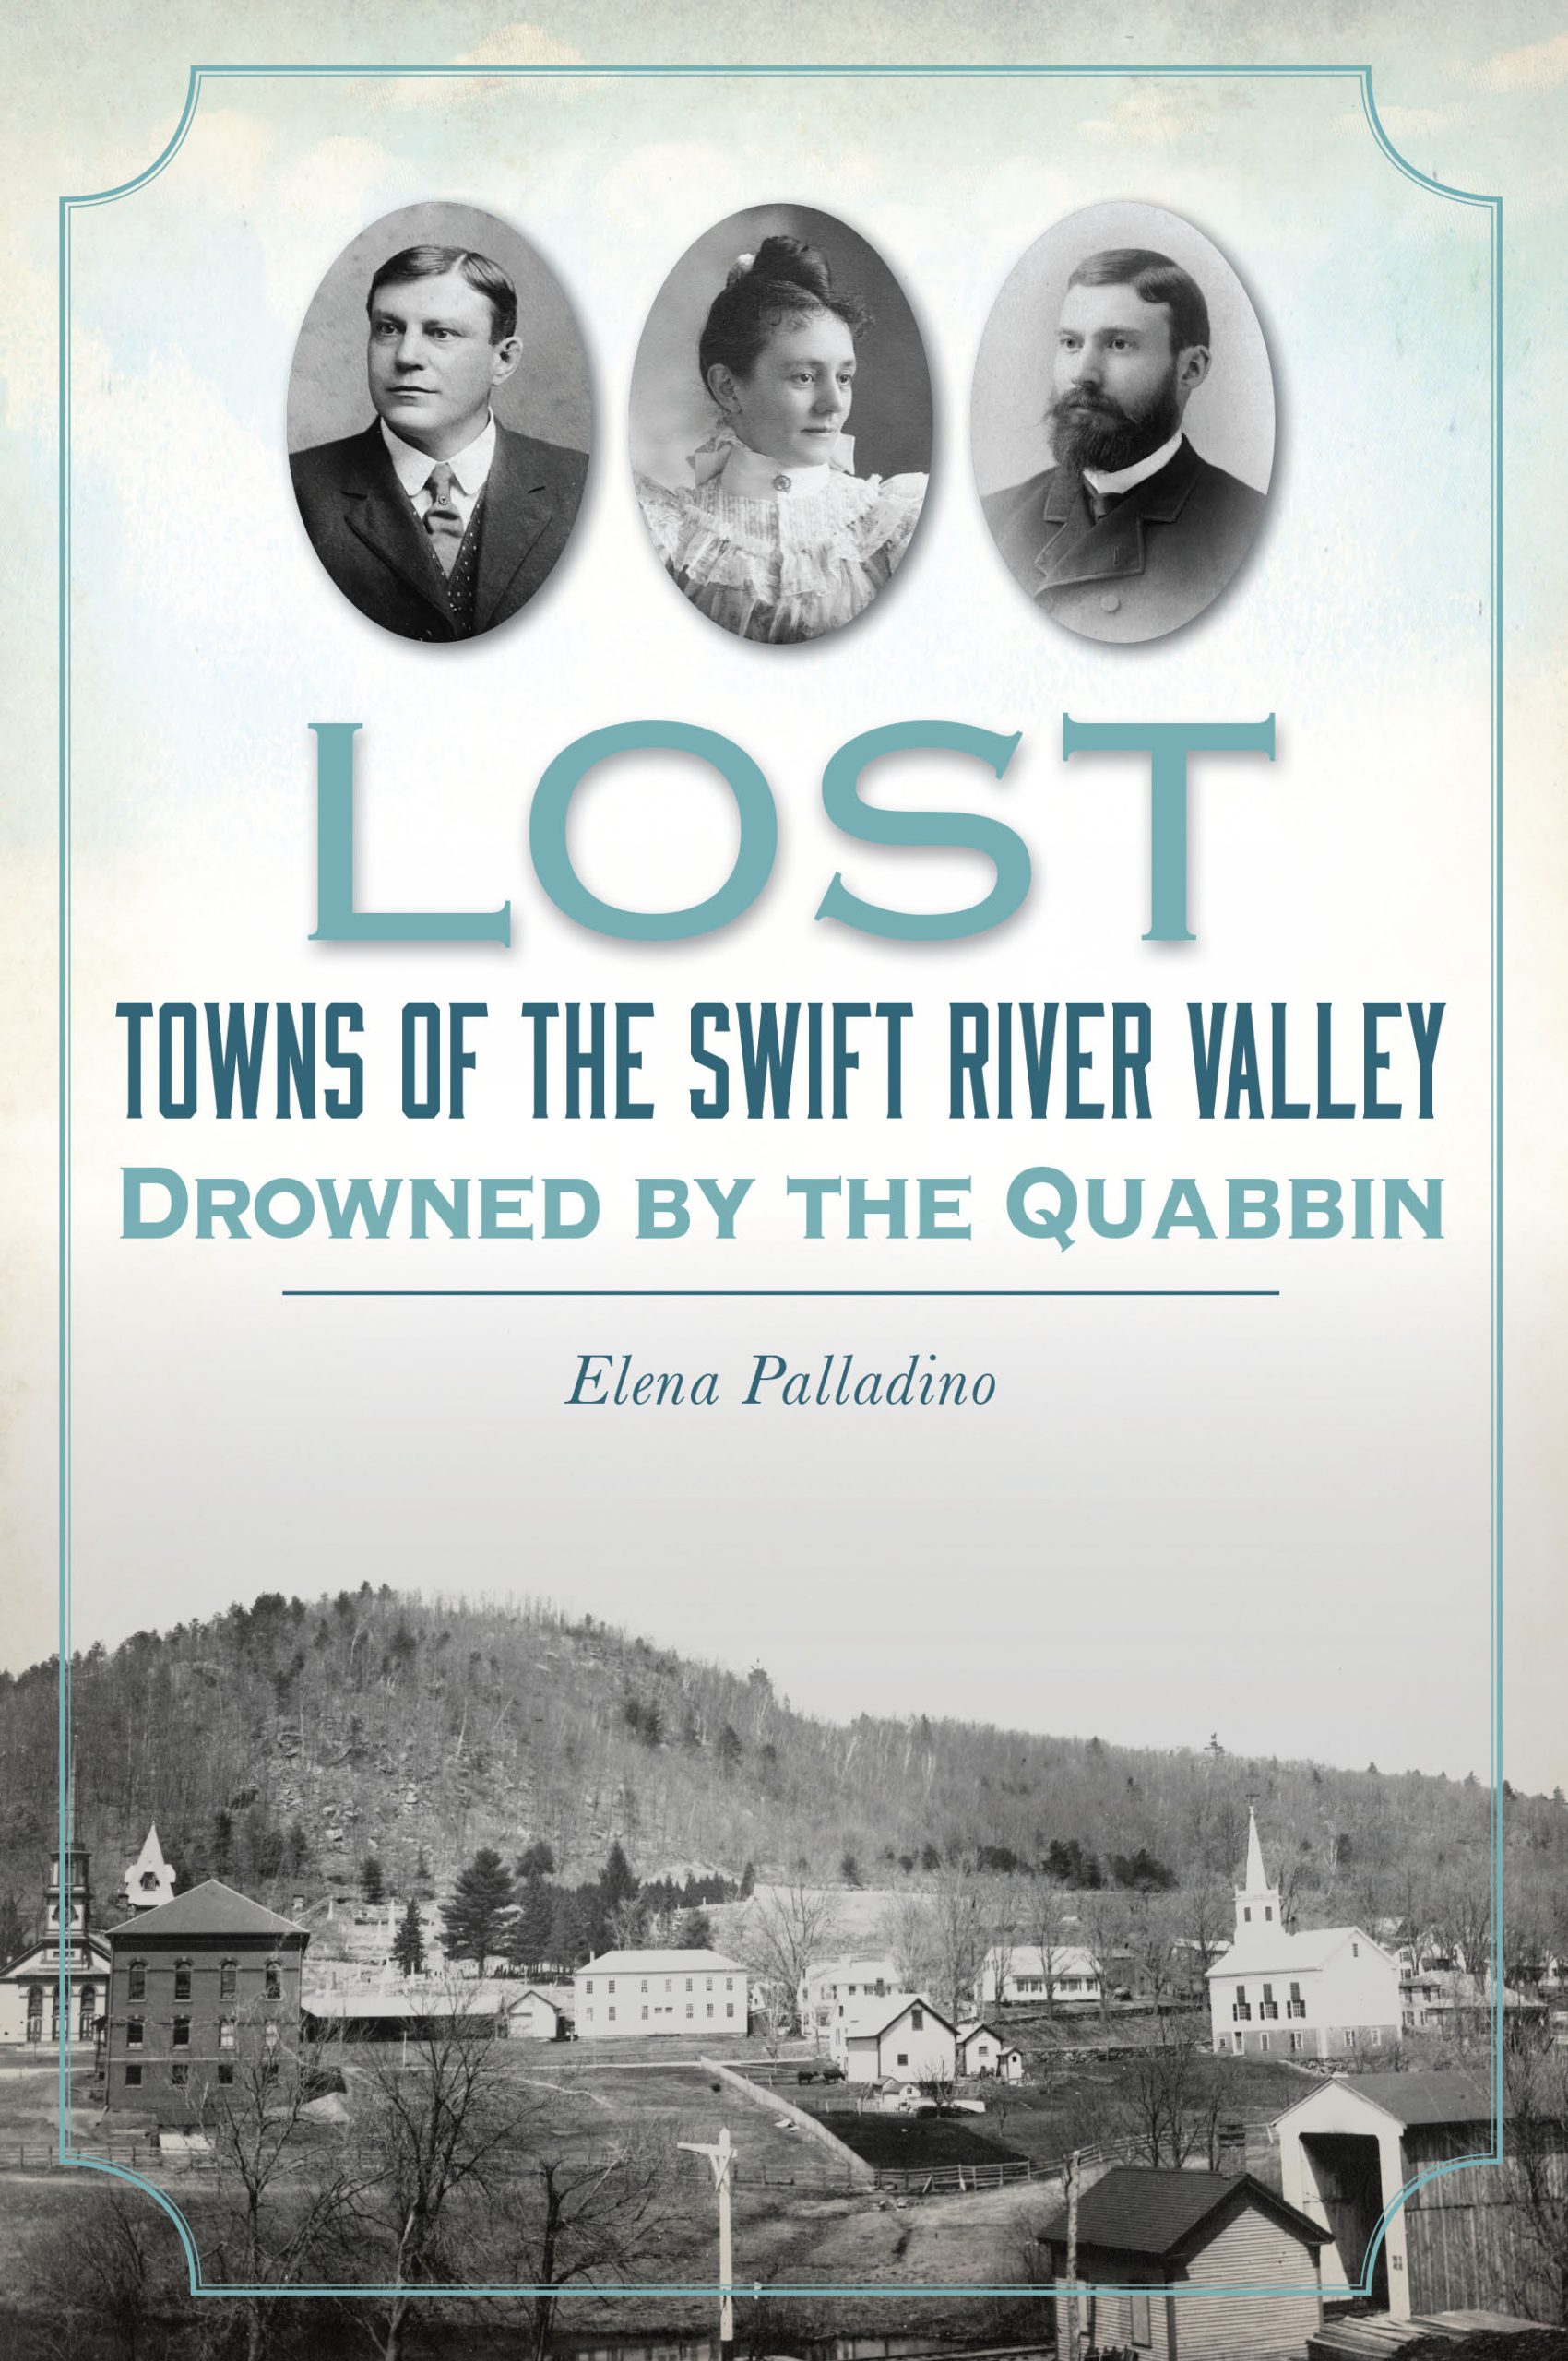 Graphic image of the Front cover of the Lost Towns of the Swift River Valley by Elena Palladino